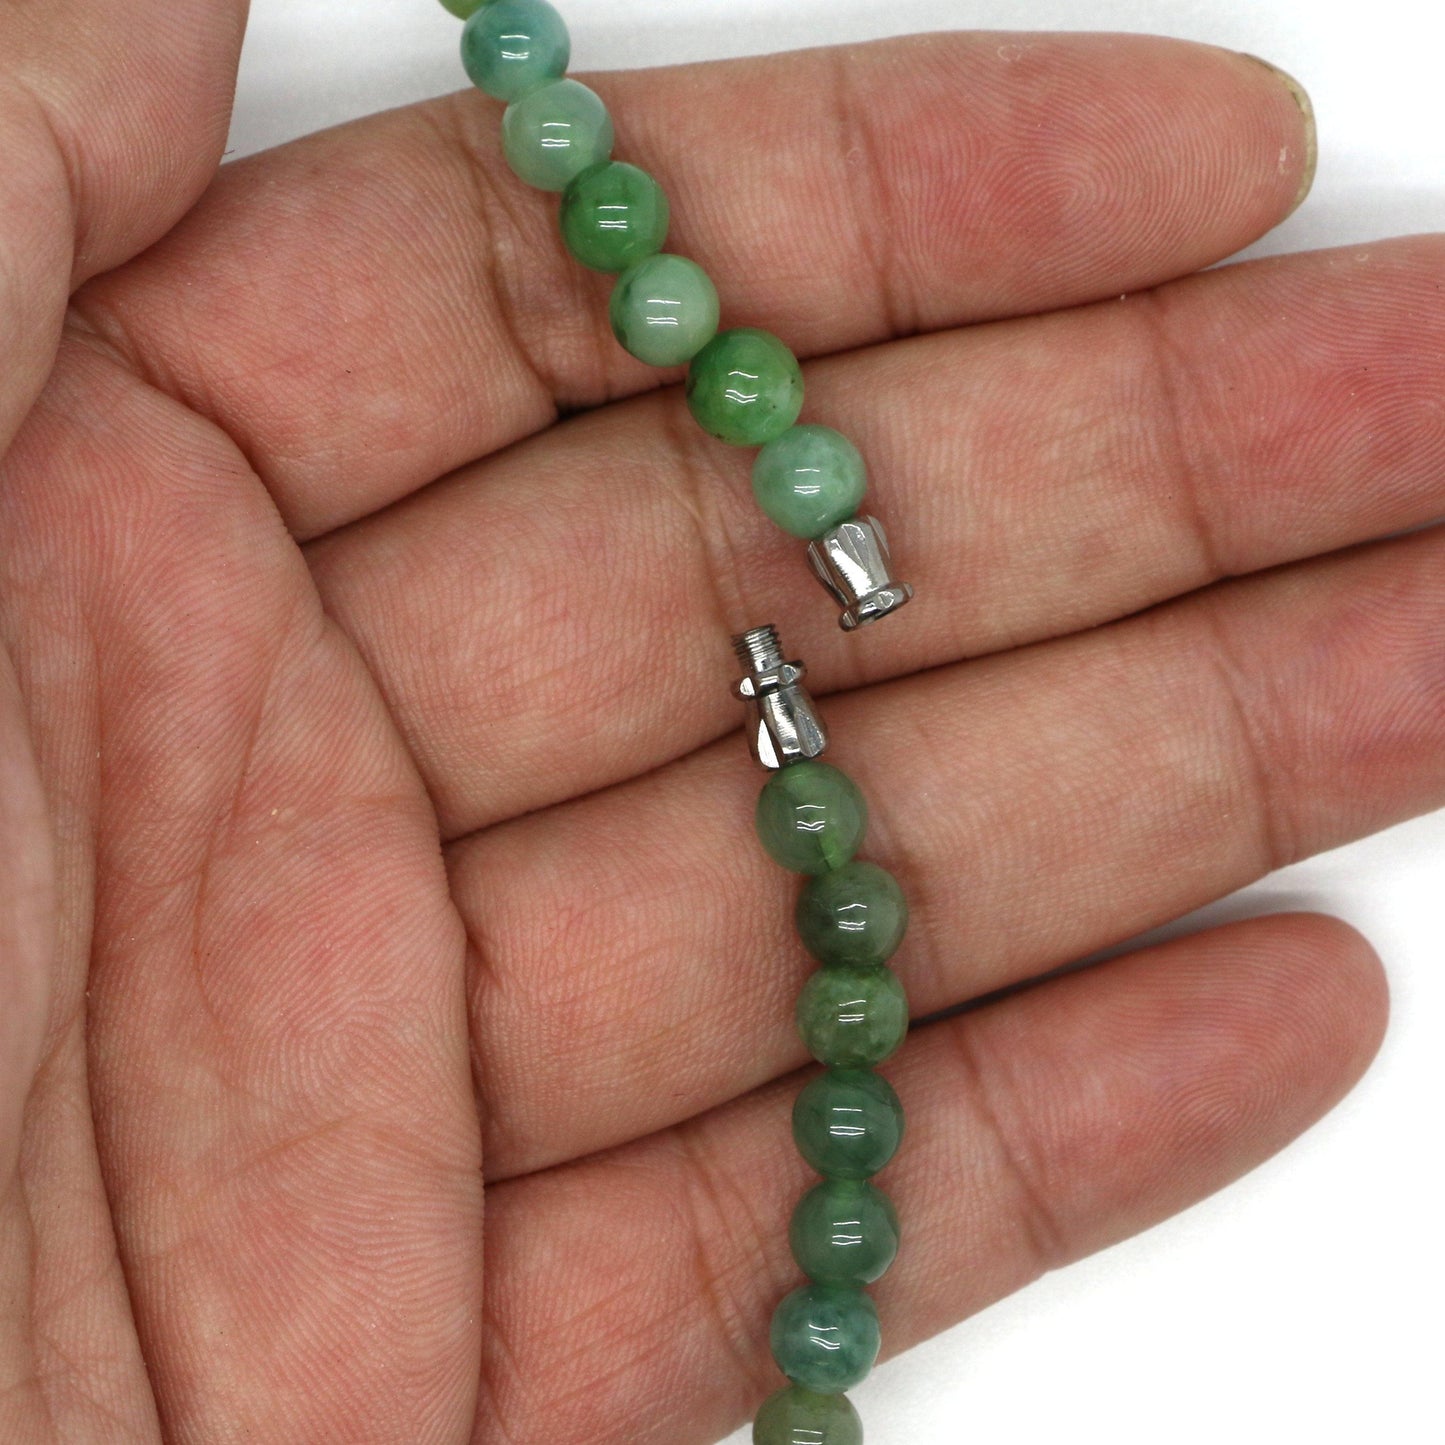 Type A Jadeite Jade Necklace Series (Fullfill USA only) B09LHHM877